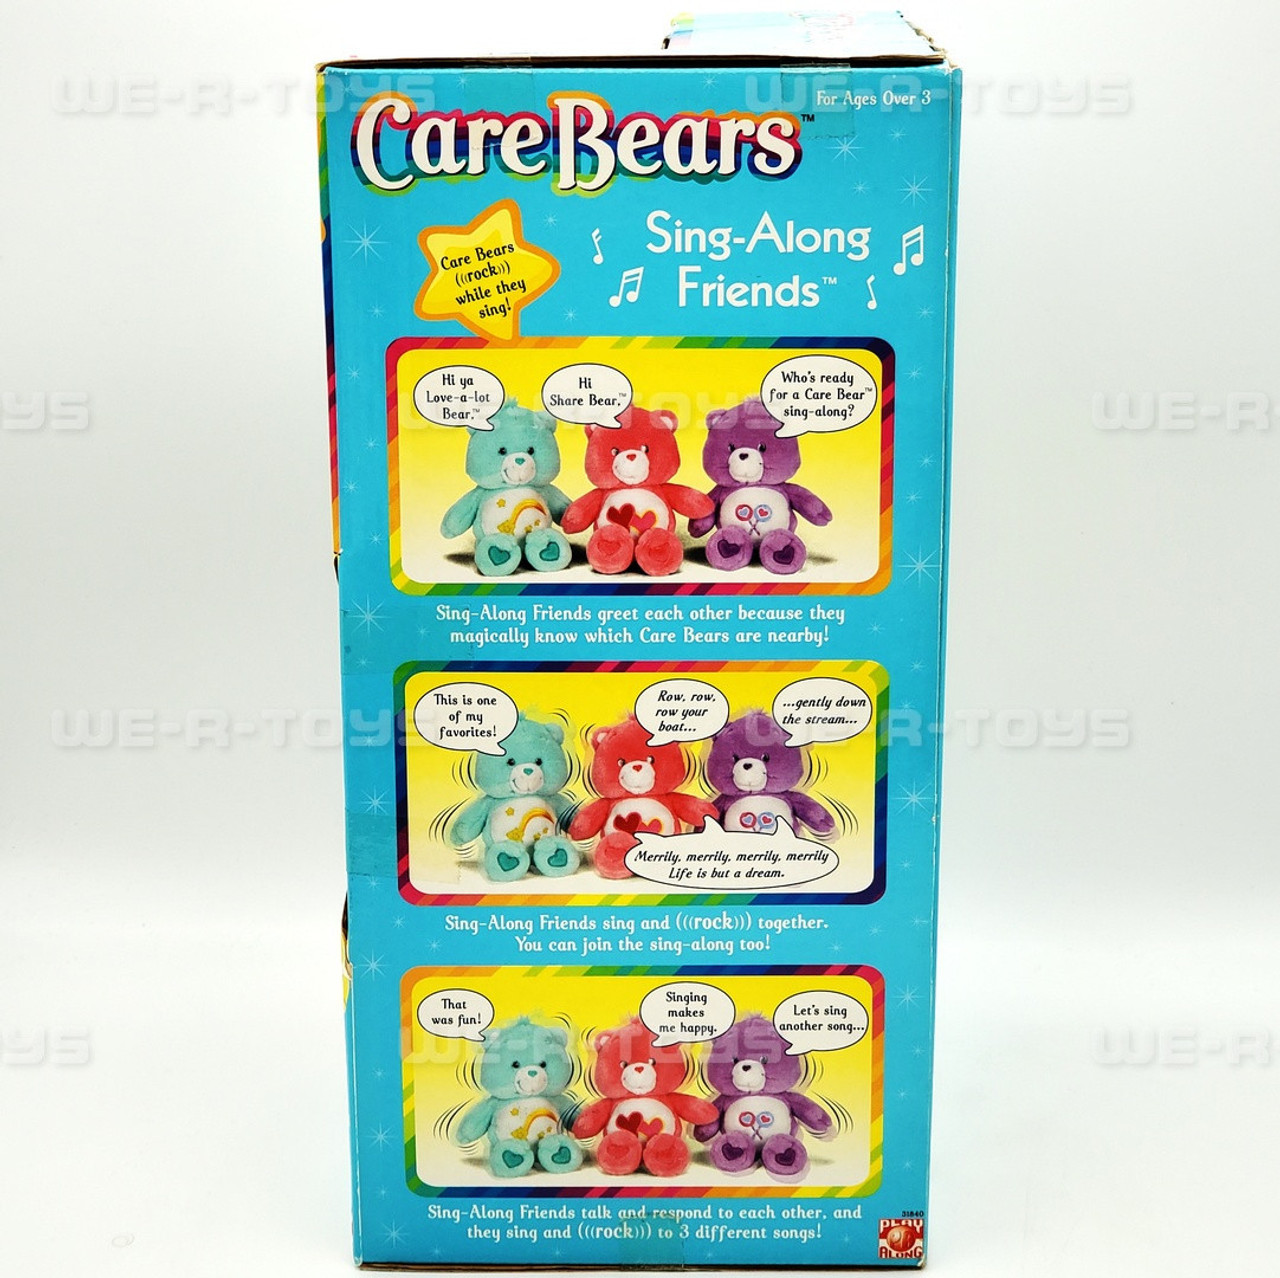 https://cdn11.bigcommerce.com/s-cy4lua1xoh/images/stencil/1280x1280/products/29503/268961/care-bears-sing-along-friends-wish-bear-plush-play-along-2003-no-31843-new__84646.1693986097.jpg?c=1?imbypass=on